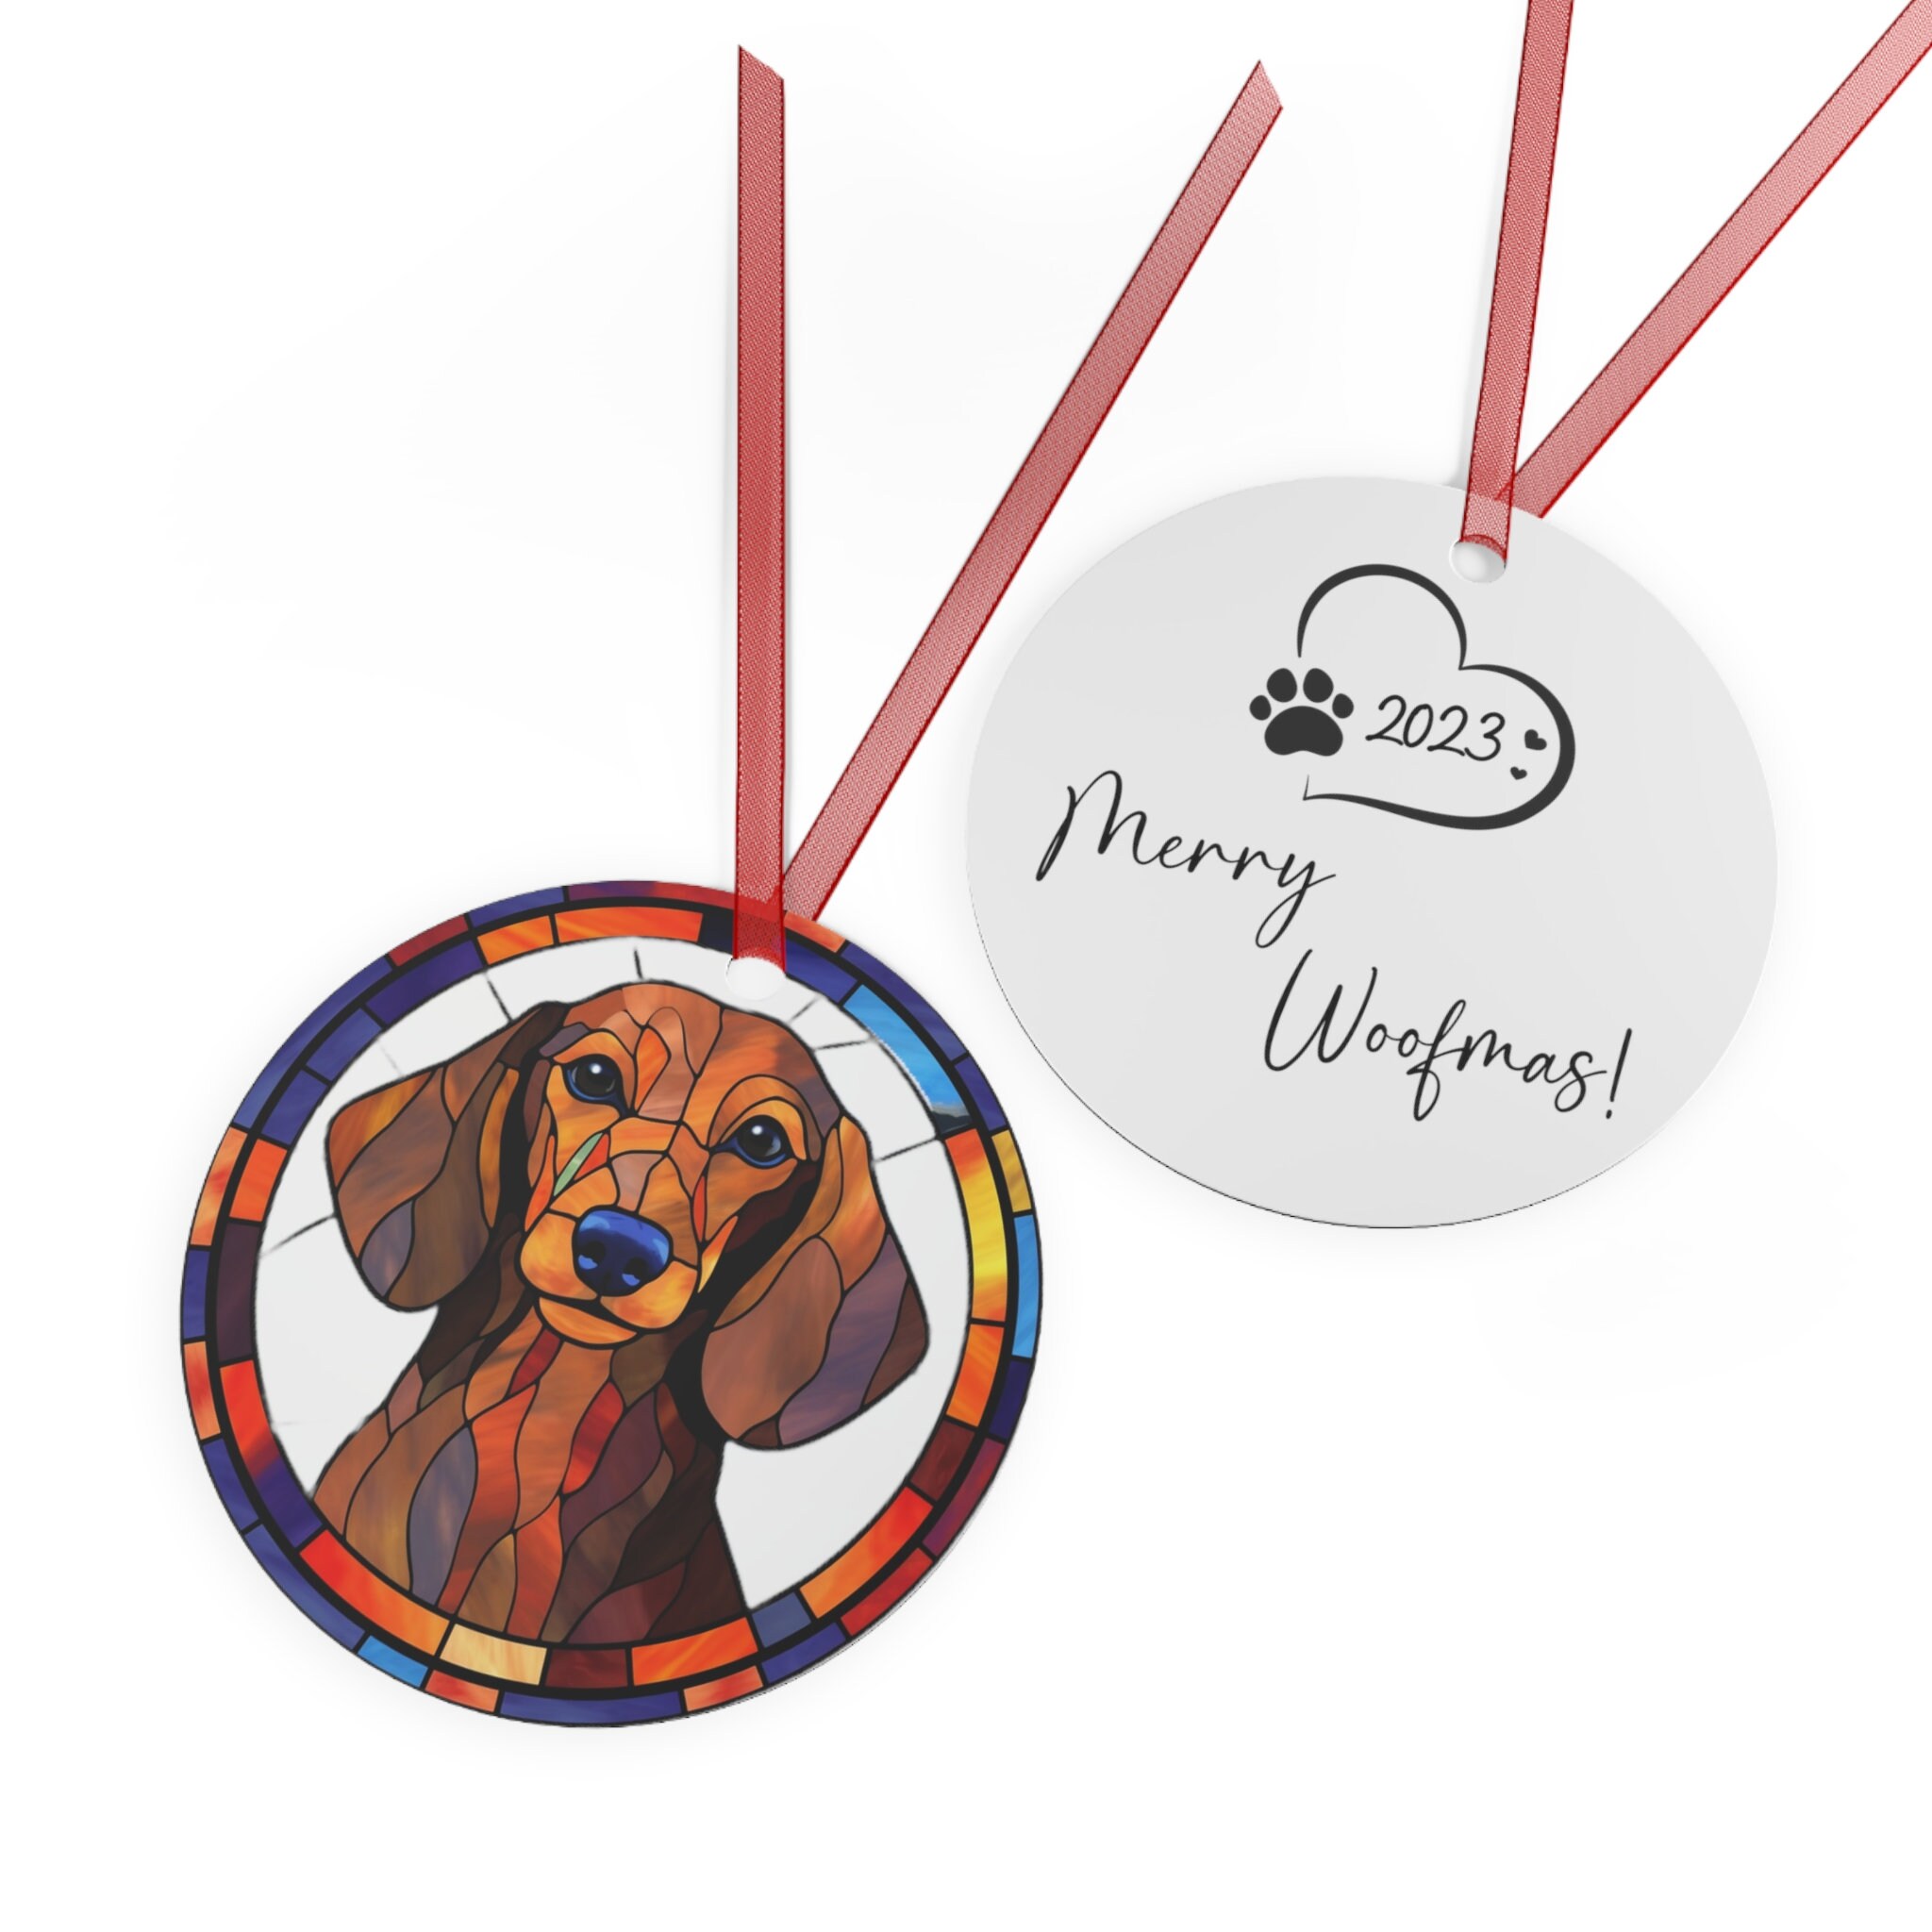 Stained Glass Effect Dachshund Metal Ornament, Dachshund Christmas ...